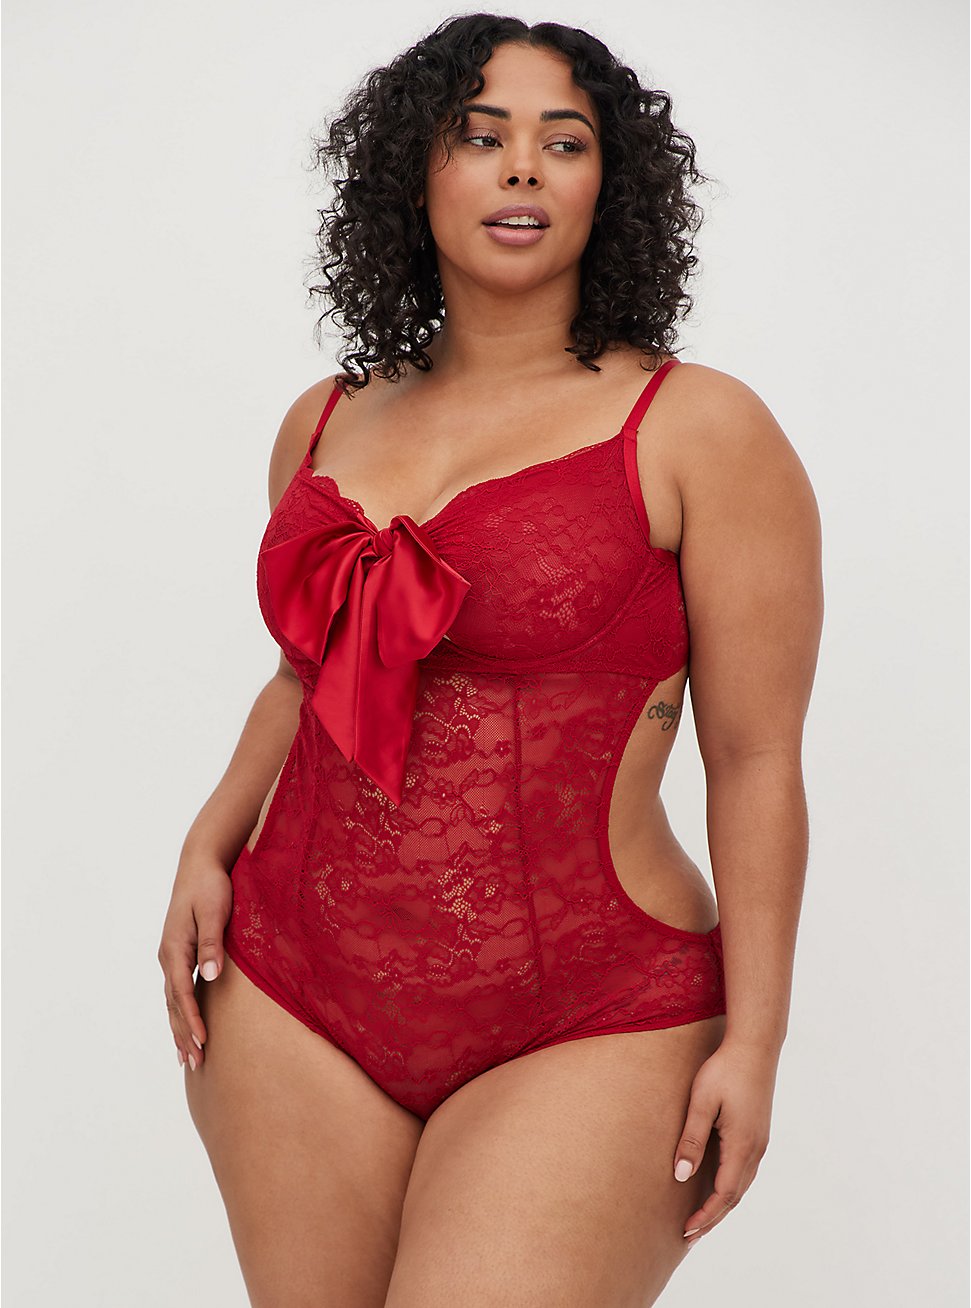 Underwire Bodysuit - Lace & Bow Red, JESTER RED, hi-res